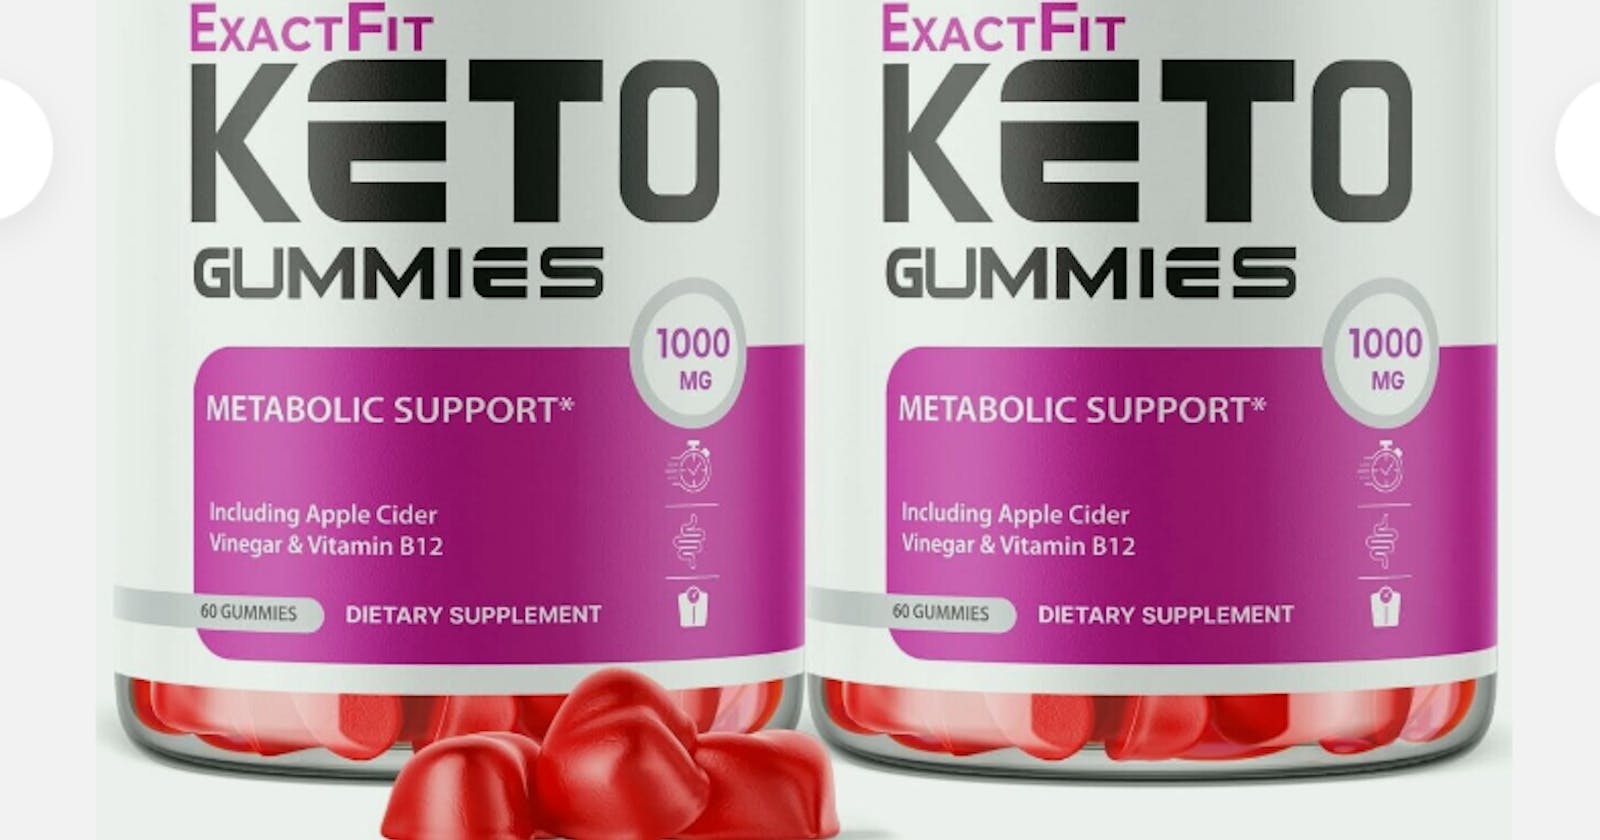 Exact Fit Keto Gummies Weight Loss Reviews?